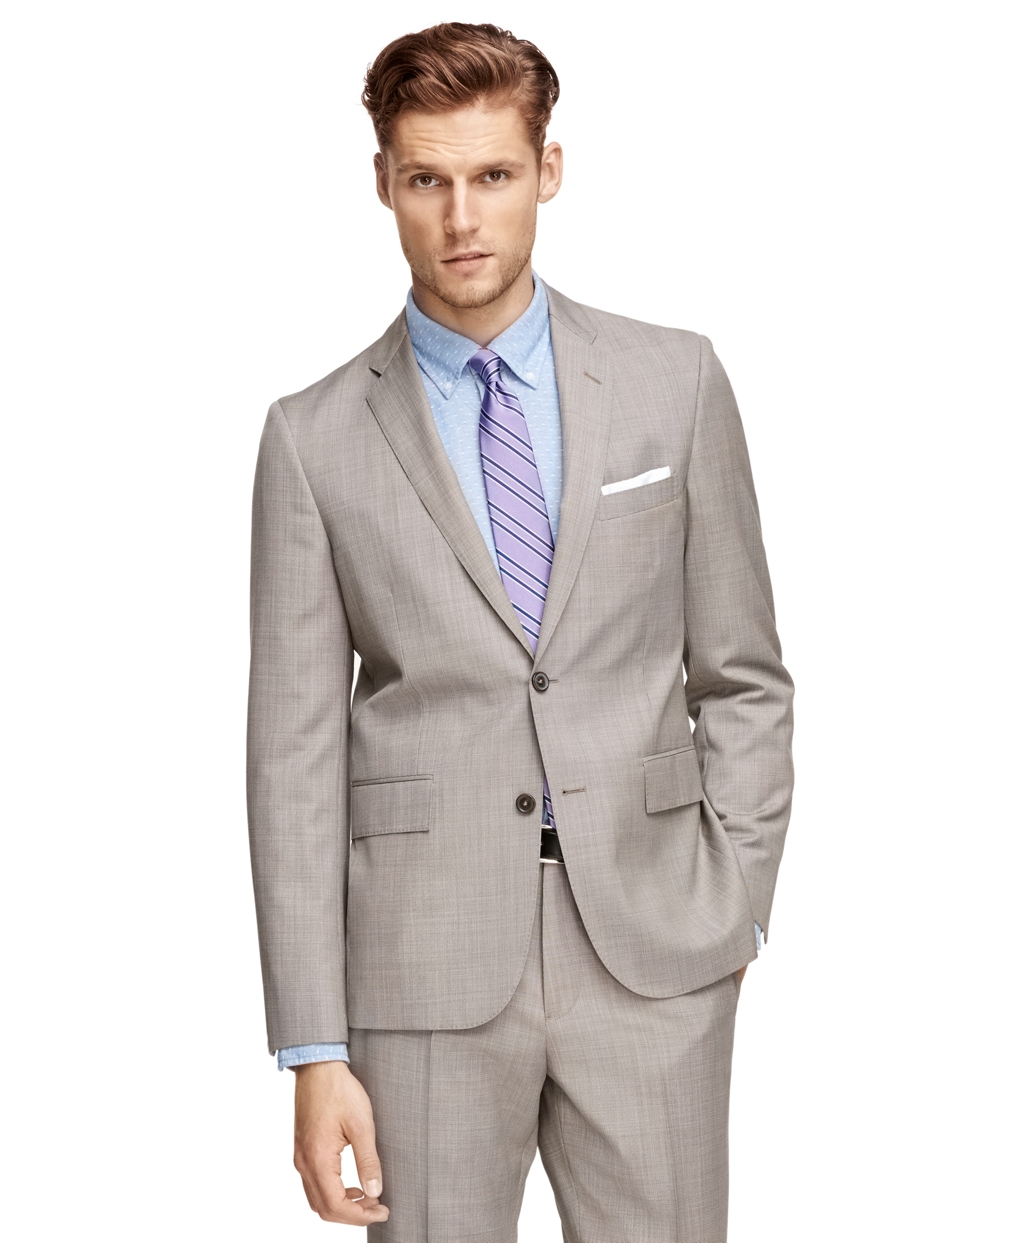 Lyst - Brooks Brothers Tan Tic Suit Jacket in Gray for Men